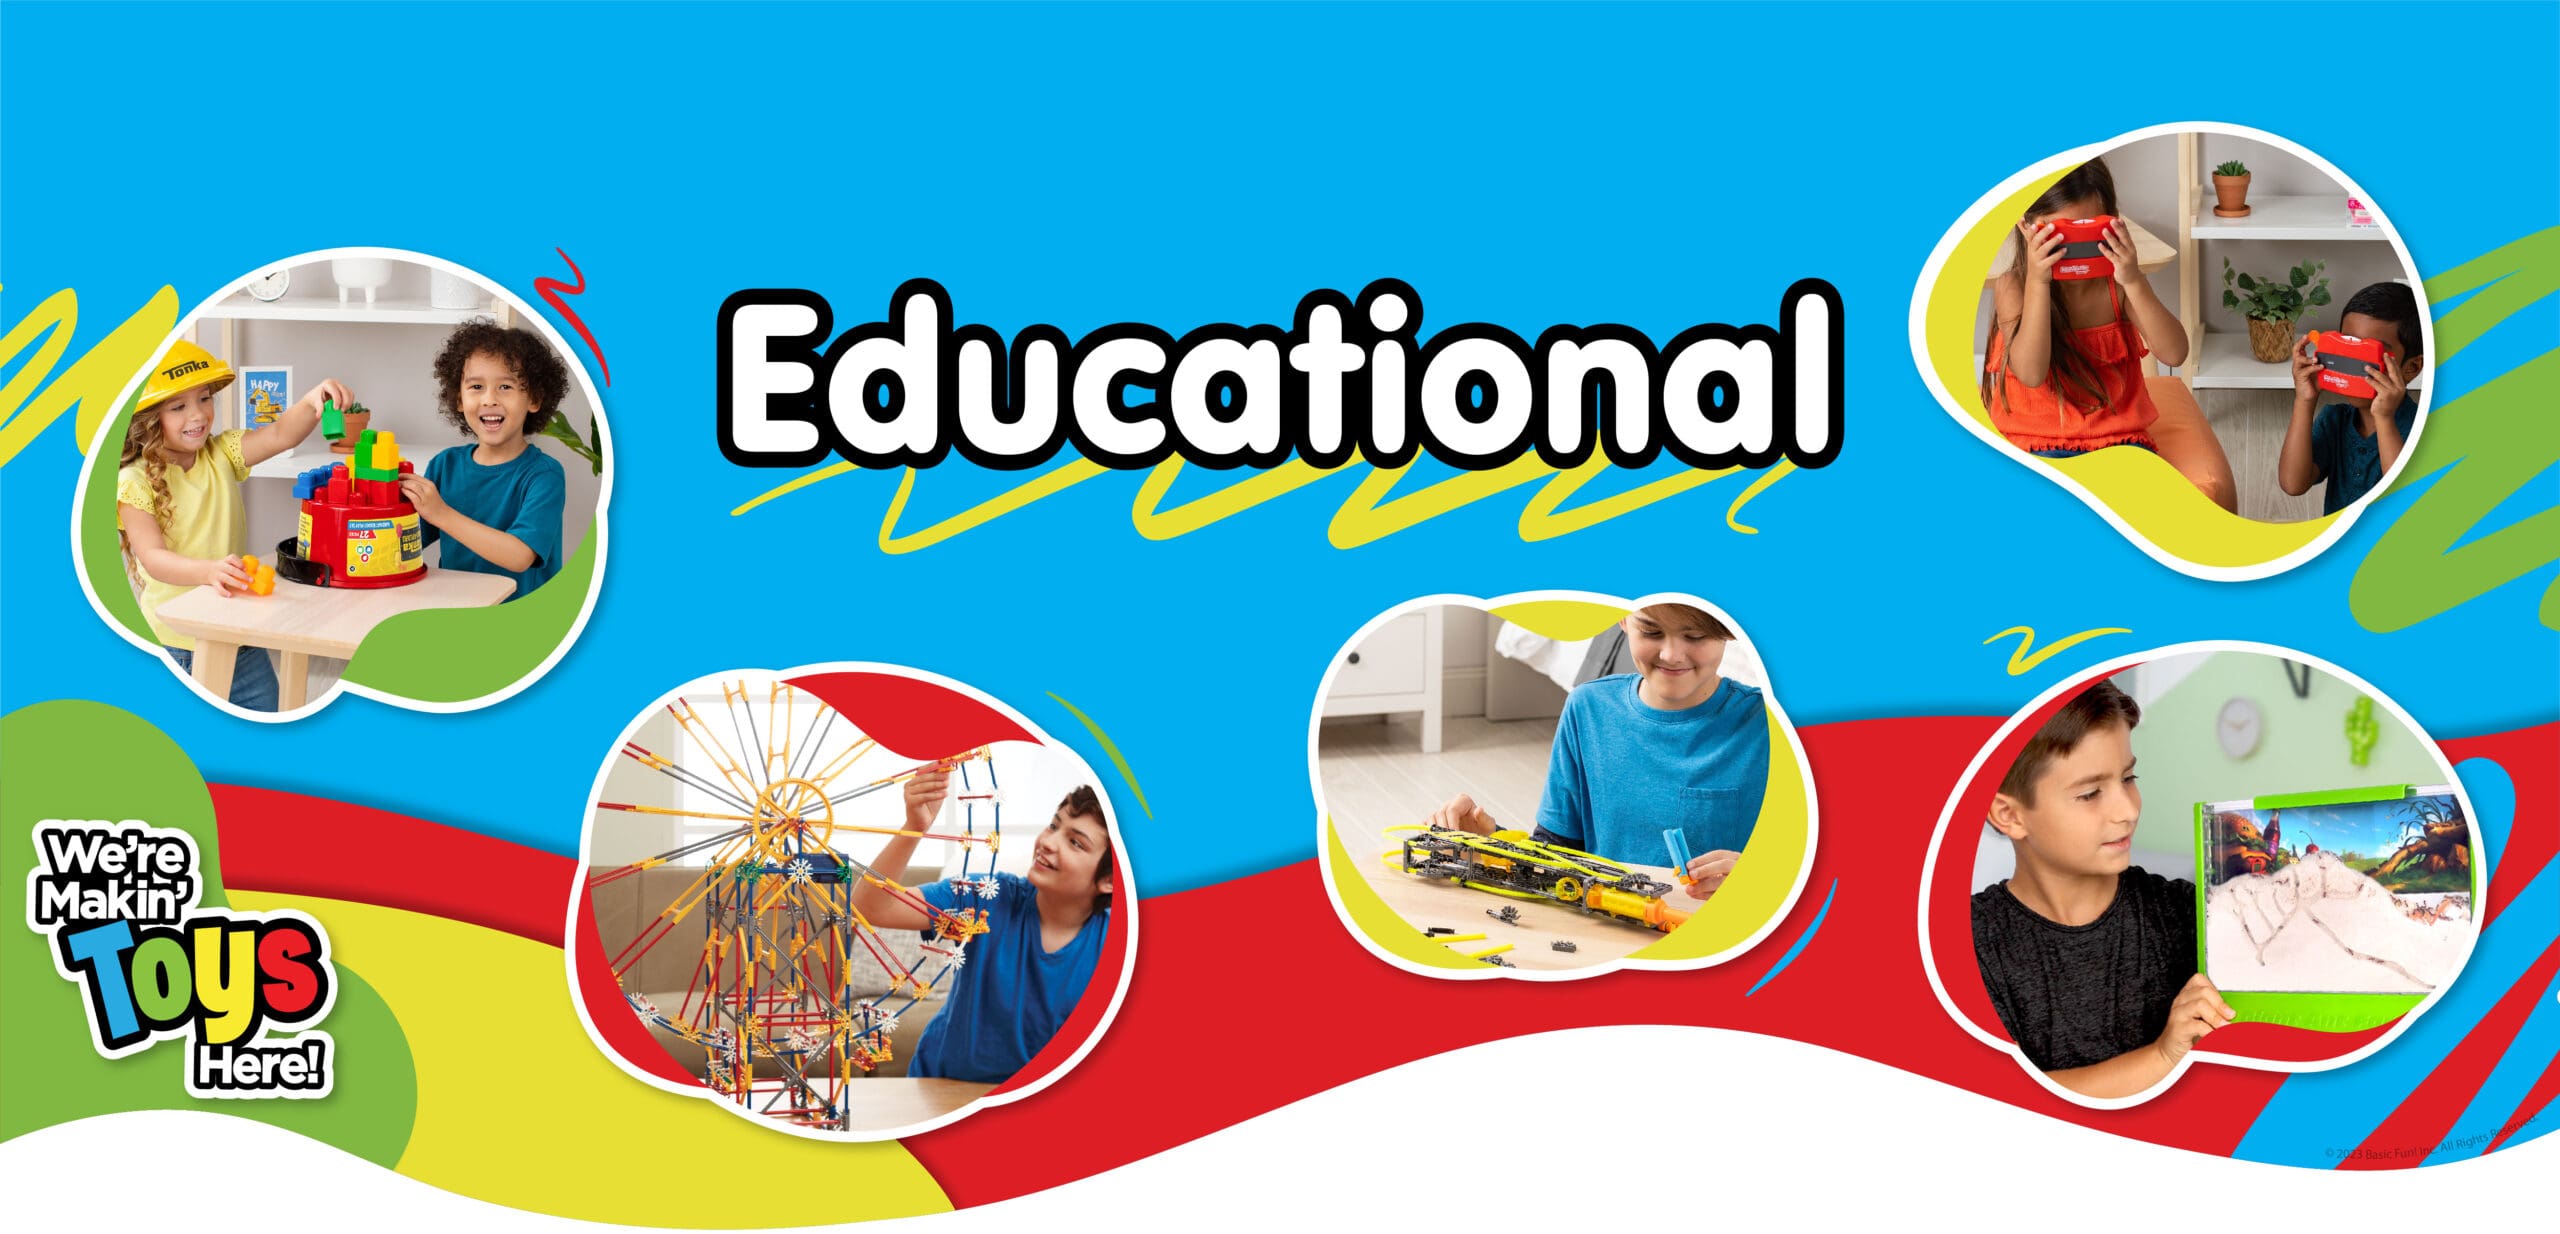 Educational banner featuring kids playing with toys